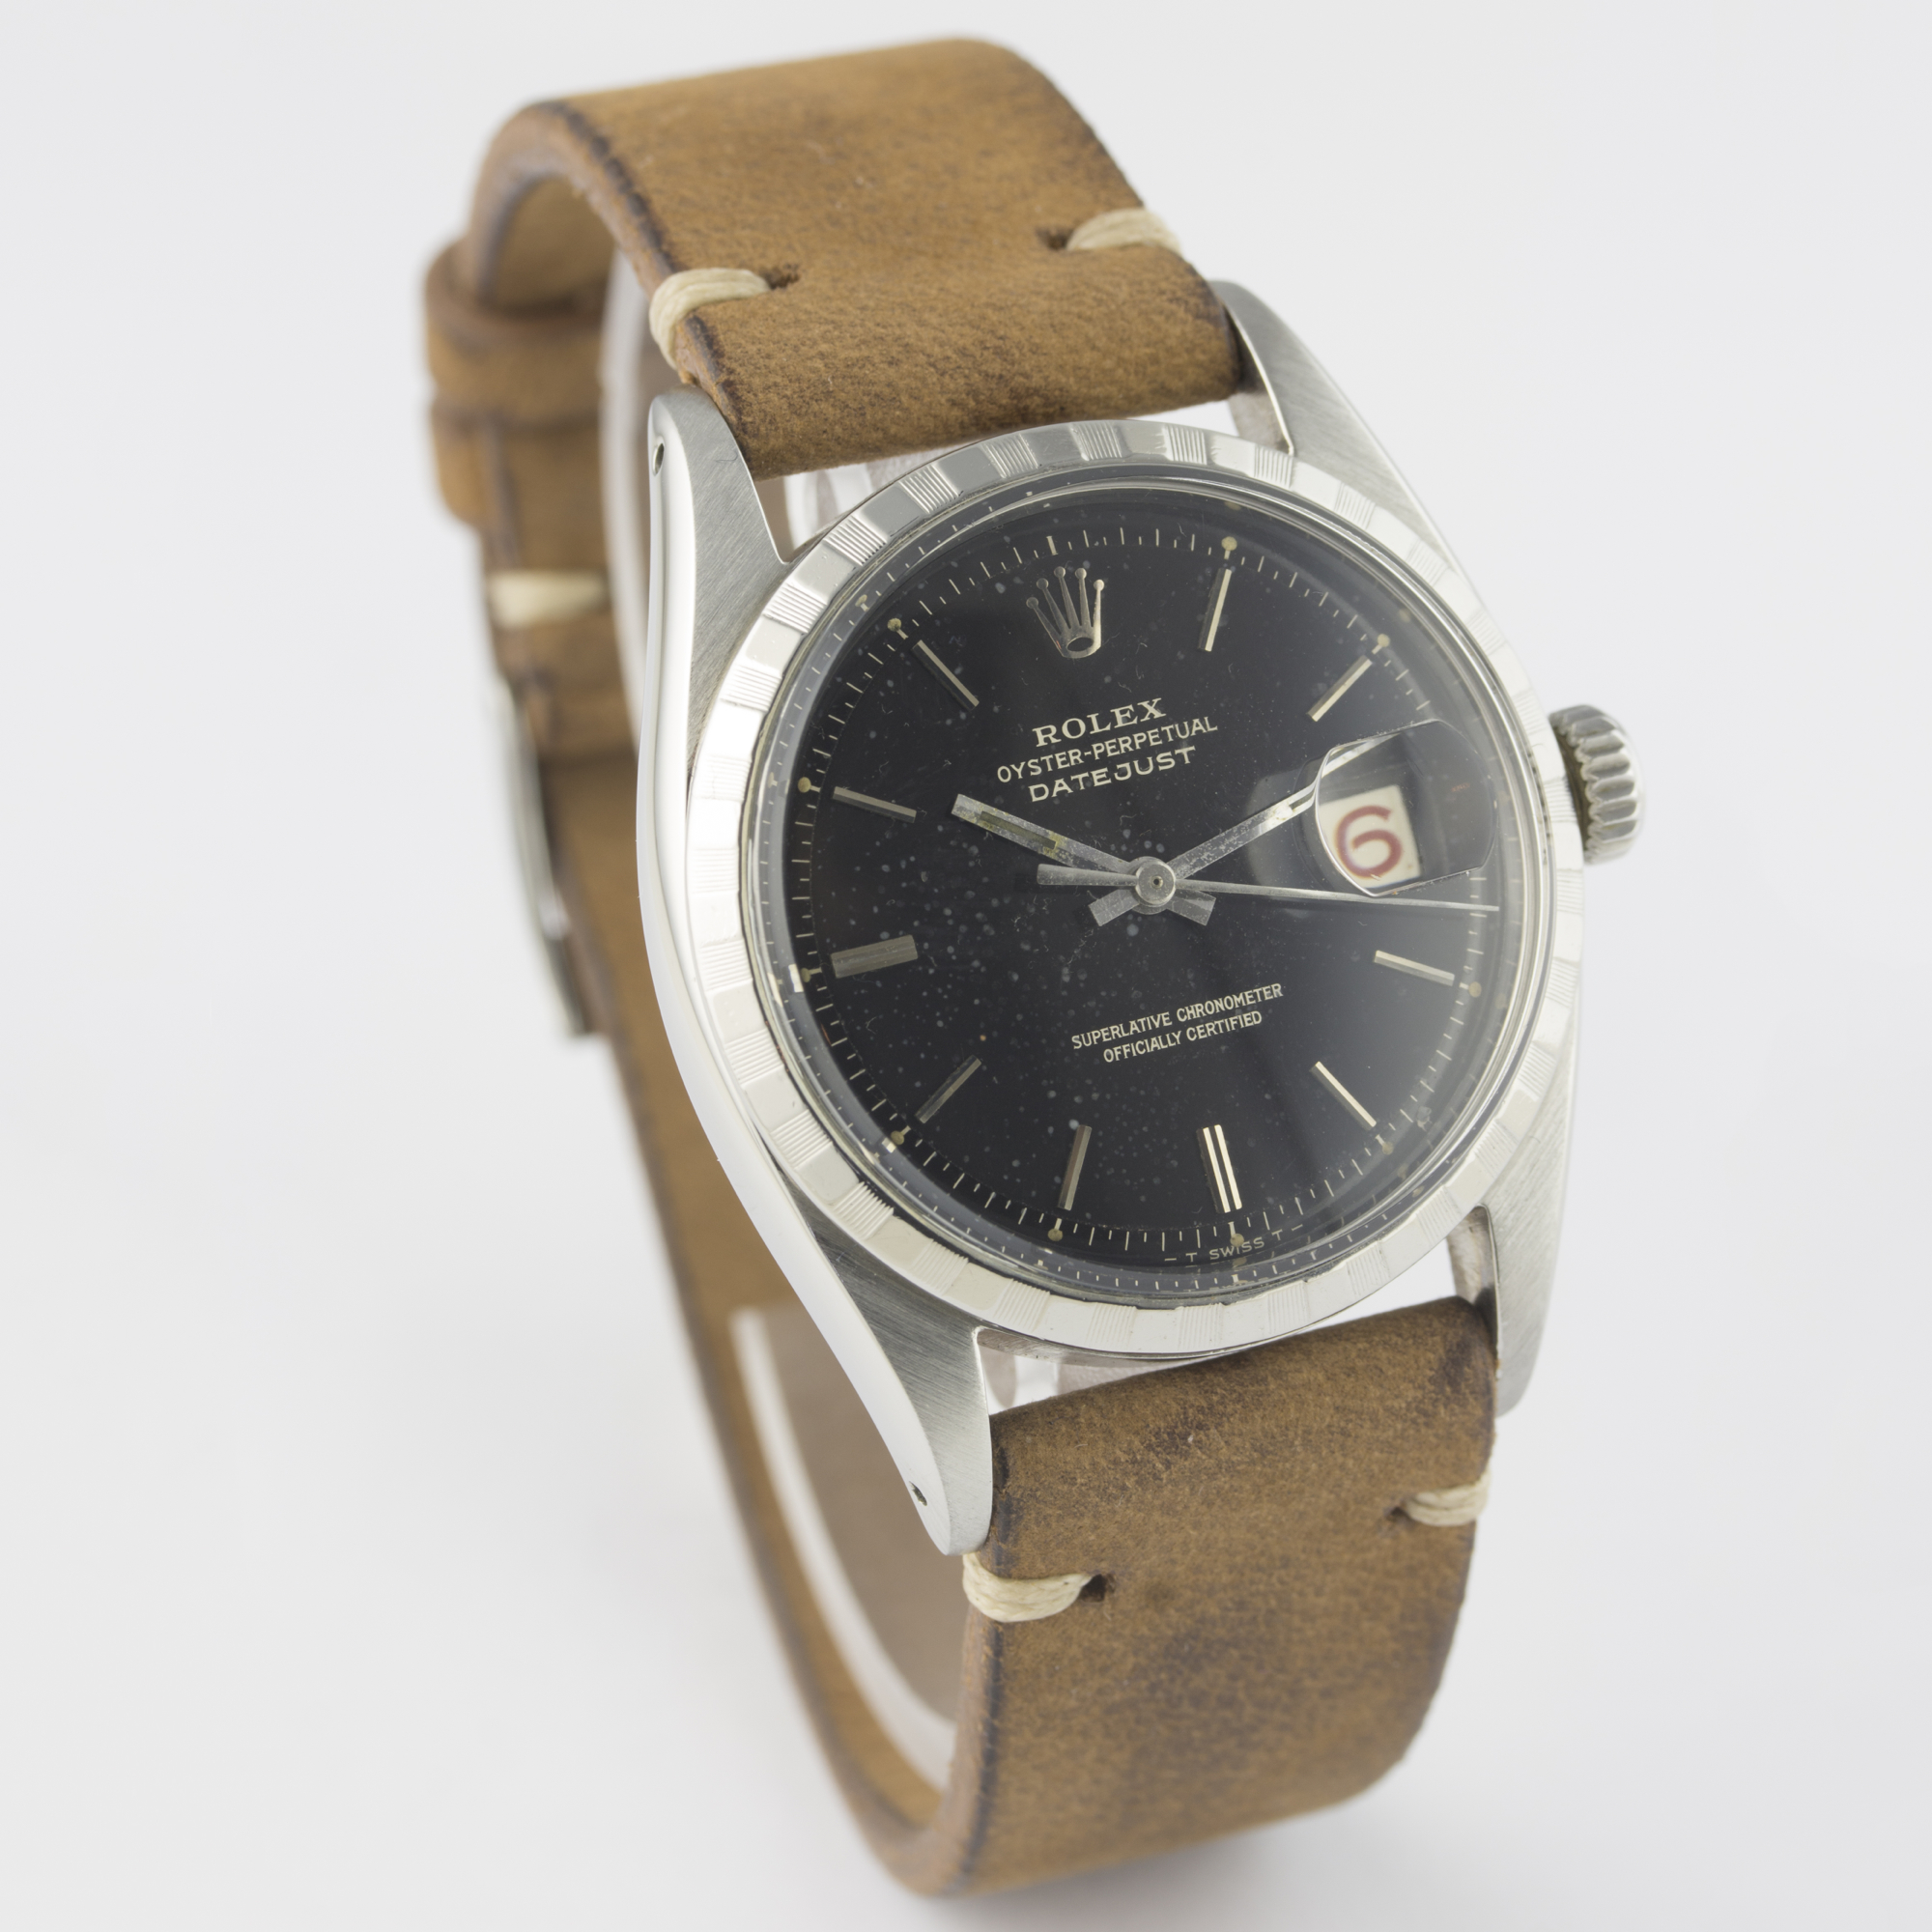 A RARE GENTLEMAN'S STAINLESS STEEL ROLEX OYSTER PERPETUAL DATEJUST WRIST WATCH CIRCA 1960, REF. 6605 - Image 6 of 9